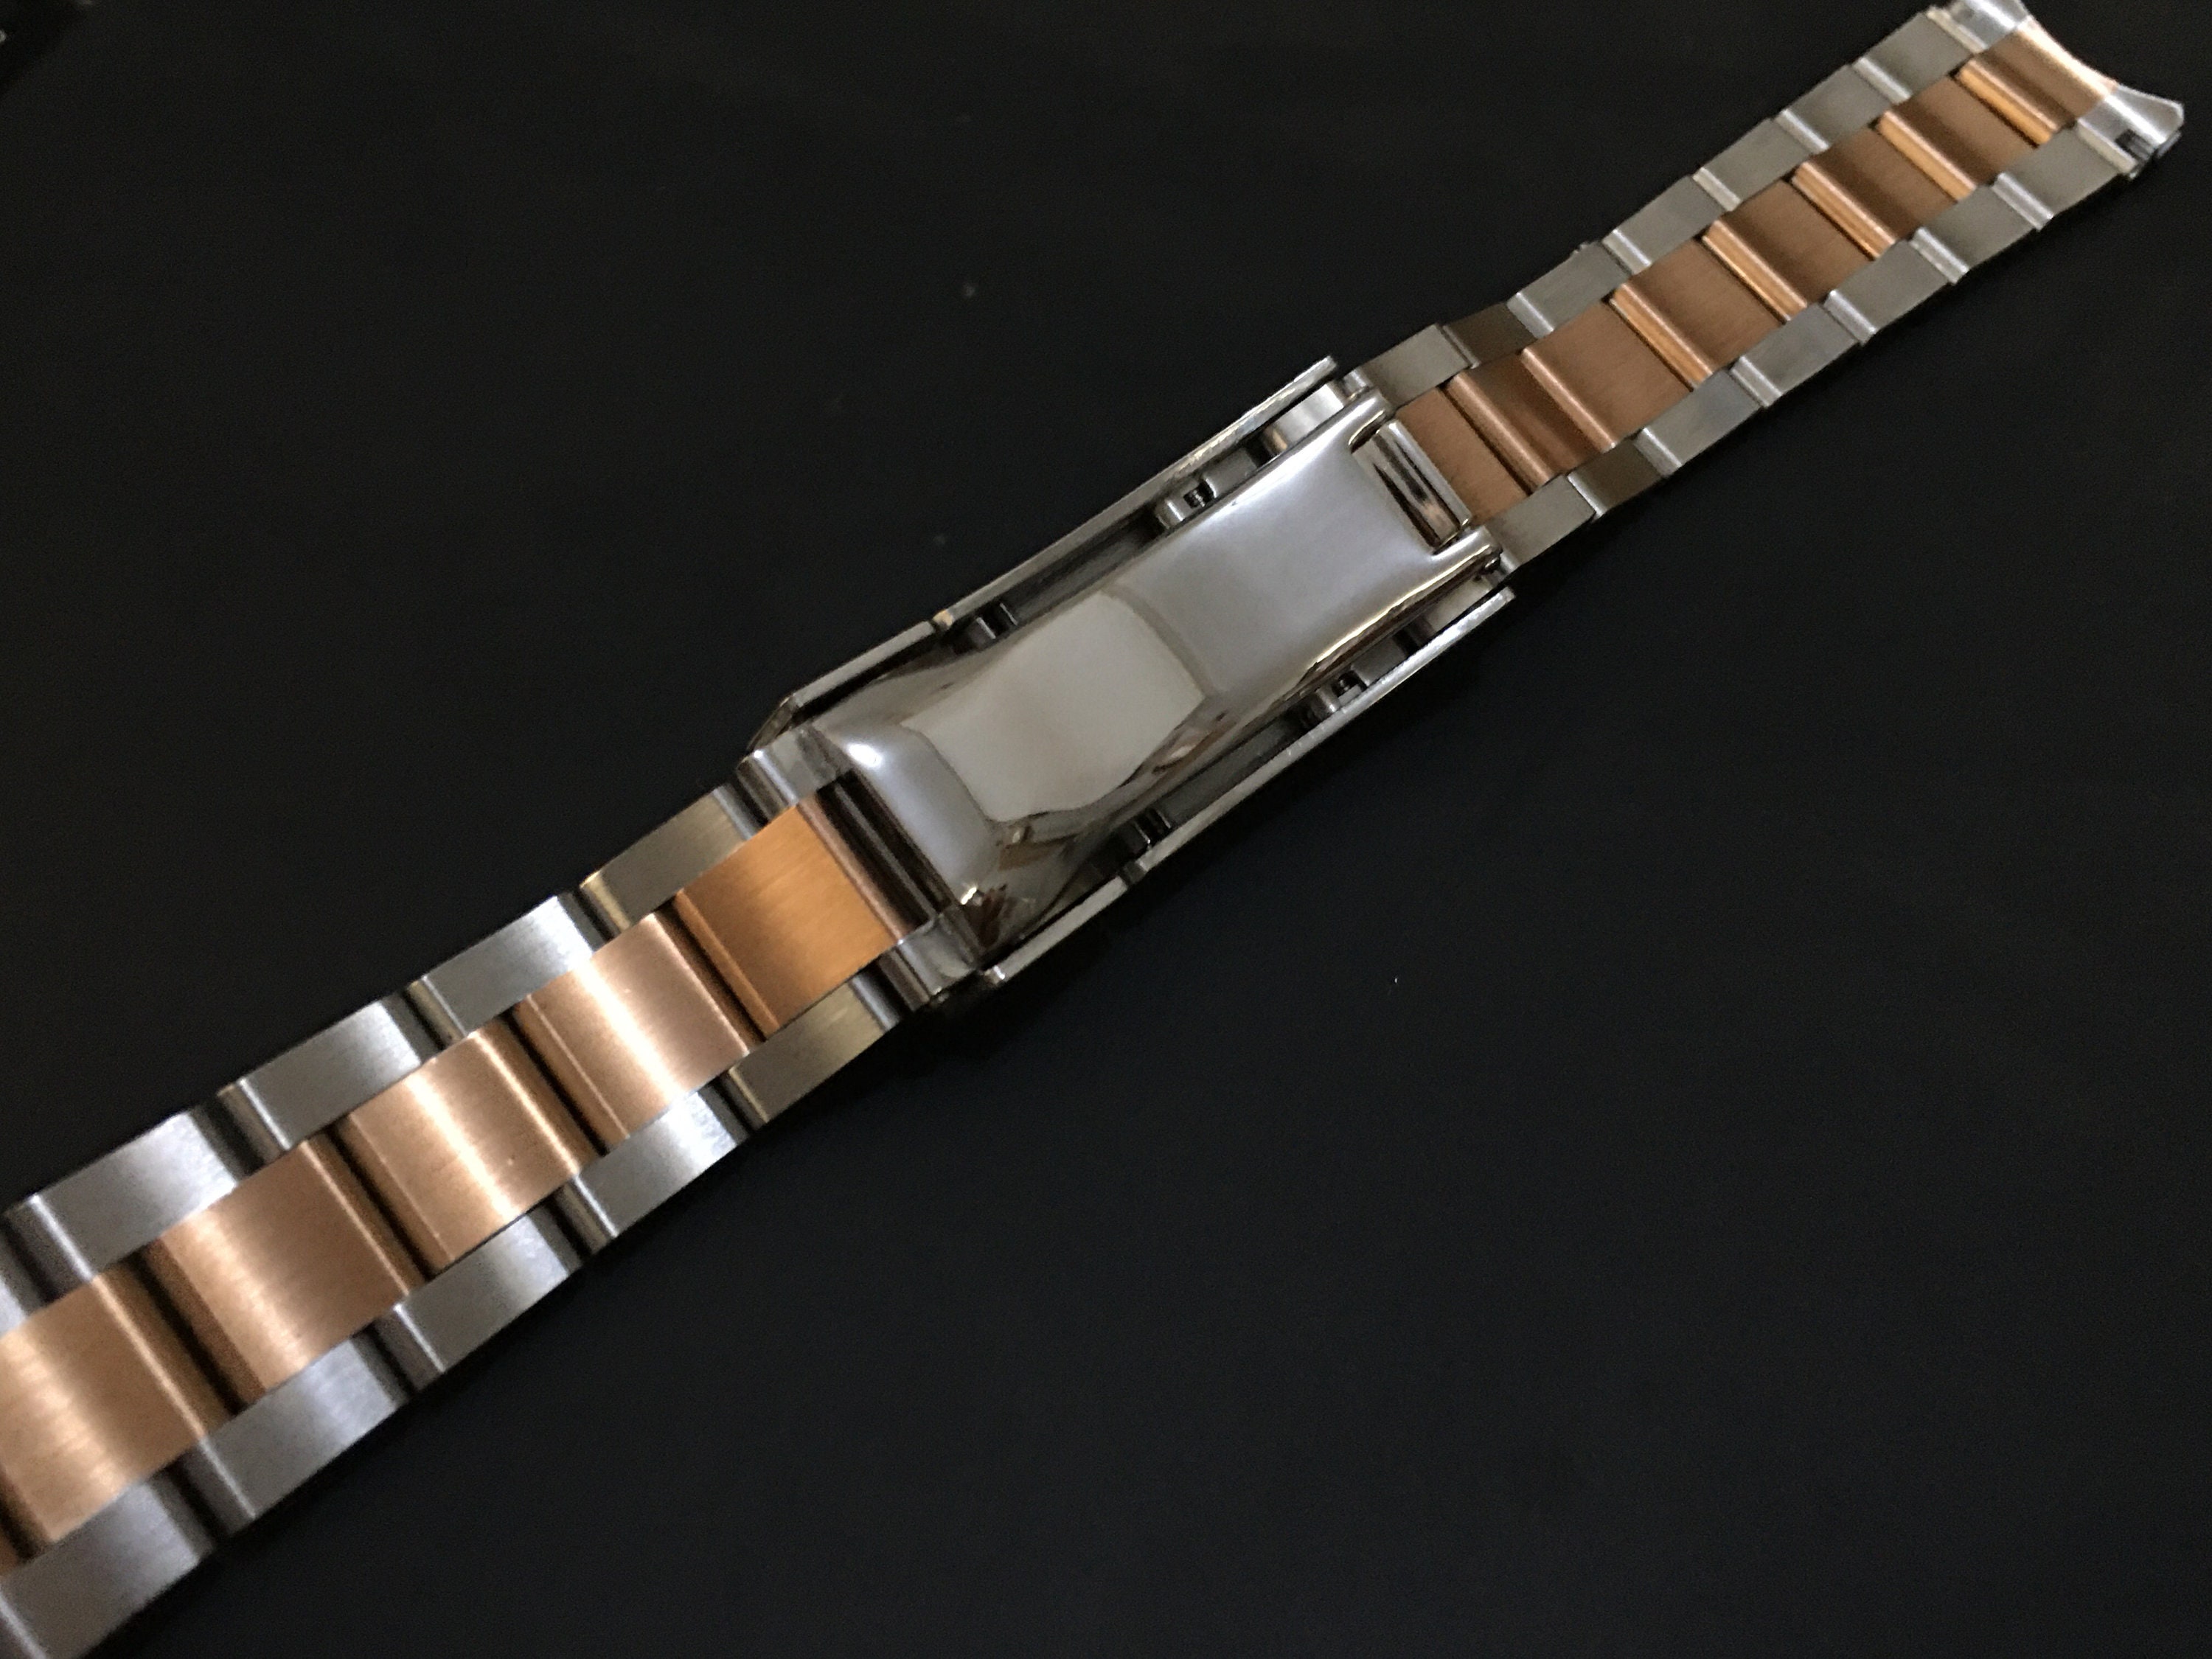 Authentic Louis Vuitton Apple Watch Band $158 ❤️ Made from